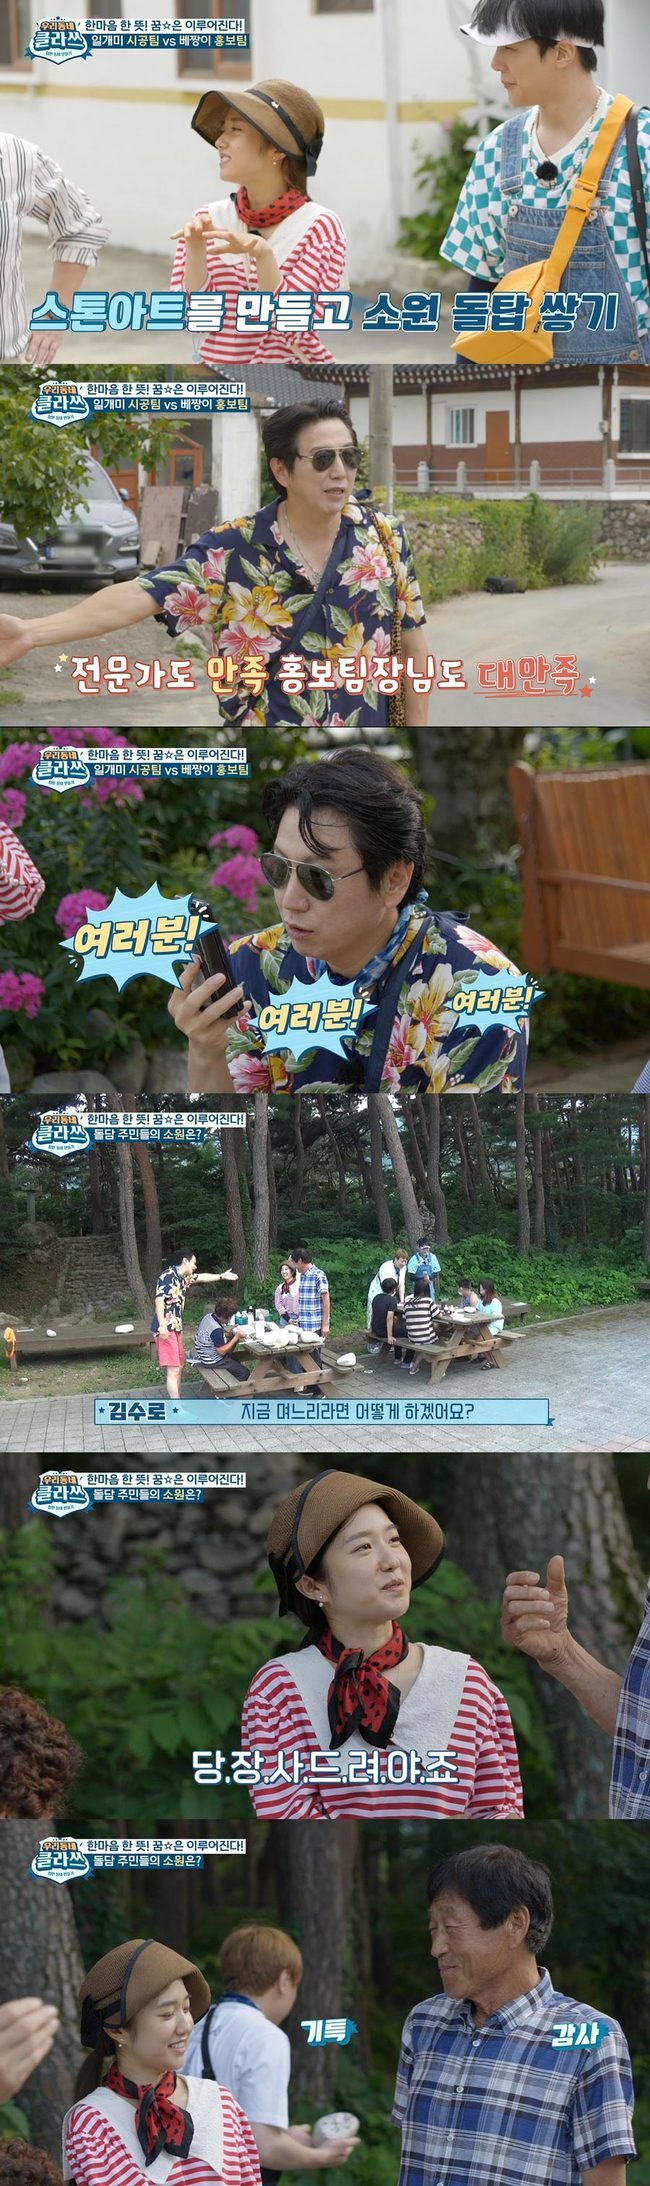 Lee Hye-sung, a former announcer, reveals the so-called Communication Free Pass Award.The local makeover variety show, Our Neighborhood Clath (hereinafter Udongkle), said on August 20, Kim Su-ro, Lee Hye-sung, Lee Jin-ho, and Monstar Minhyuk, who visited Sokcho Doldam Village in colorful retro fashion, will be released on the show.Lee Hye-sung, who had no intention of making a Hope Stone Tower using stone art with the villagers, made the village elder laugh with a sense of sense and raises curiosity. According to the production crew, Kim Su-ro, Lee Hye-sung, Lee Jin-ho and Monstar X Minhyuk are busy for the Class Up of Sokcho Doldam Village.The four people who are looking around the village find a pile of stones piled up in front of an old warehouse, and the village is surrounded by the passion of the hot-fly expedition that does not give in to the hot weather.Lee Hye-sung recalled Stone Art, which he experienced in the last round, and the Hot Plot expedition decided to collaborate with the village chief to create a Hope Stone Tower with the precious Hope of the villagers.Residents gather in front of the Samseo Village Hall in the announcement of the new concept village of Kim Su-ro and Lee Hye-sung.The stone carefully prepared by Hotple Expedition depicts the colorful stories of the villagers, from the simple Hope to make a dream of children to the Hope full of reality that they want to have the latest computer and smartphone of elementary and junior high school students.Kim Su-ro and Lee Hye-sung can not stand laughing at the story of an elderly man who is farming 4,000 square meters of corn.The story is that the elderly refused to need (to cool) the familys proposal to buy air conditioners last year, and conveyed a video message that they regret it by the exceptionally hot summer of this year.Kim Su-ro asked Lee Hye-sung, What would you do if Daughter-in-law? As soon as Lee Hye-sung waited, I have to buy it right away!Father! Lee Hye-sungs 100 points response says, Im so grateful for that.Expectations are high on how the Hope Stone Tower, which combines the hot-fly expedition Kim Su-ro, Lee Jin-ho, Lee Hye-sung, Monstar X Minhyuk and villagers, will be born.Lee Hye-sung is in public with broadcaster Jun Hyun-moo.